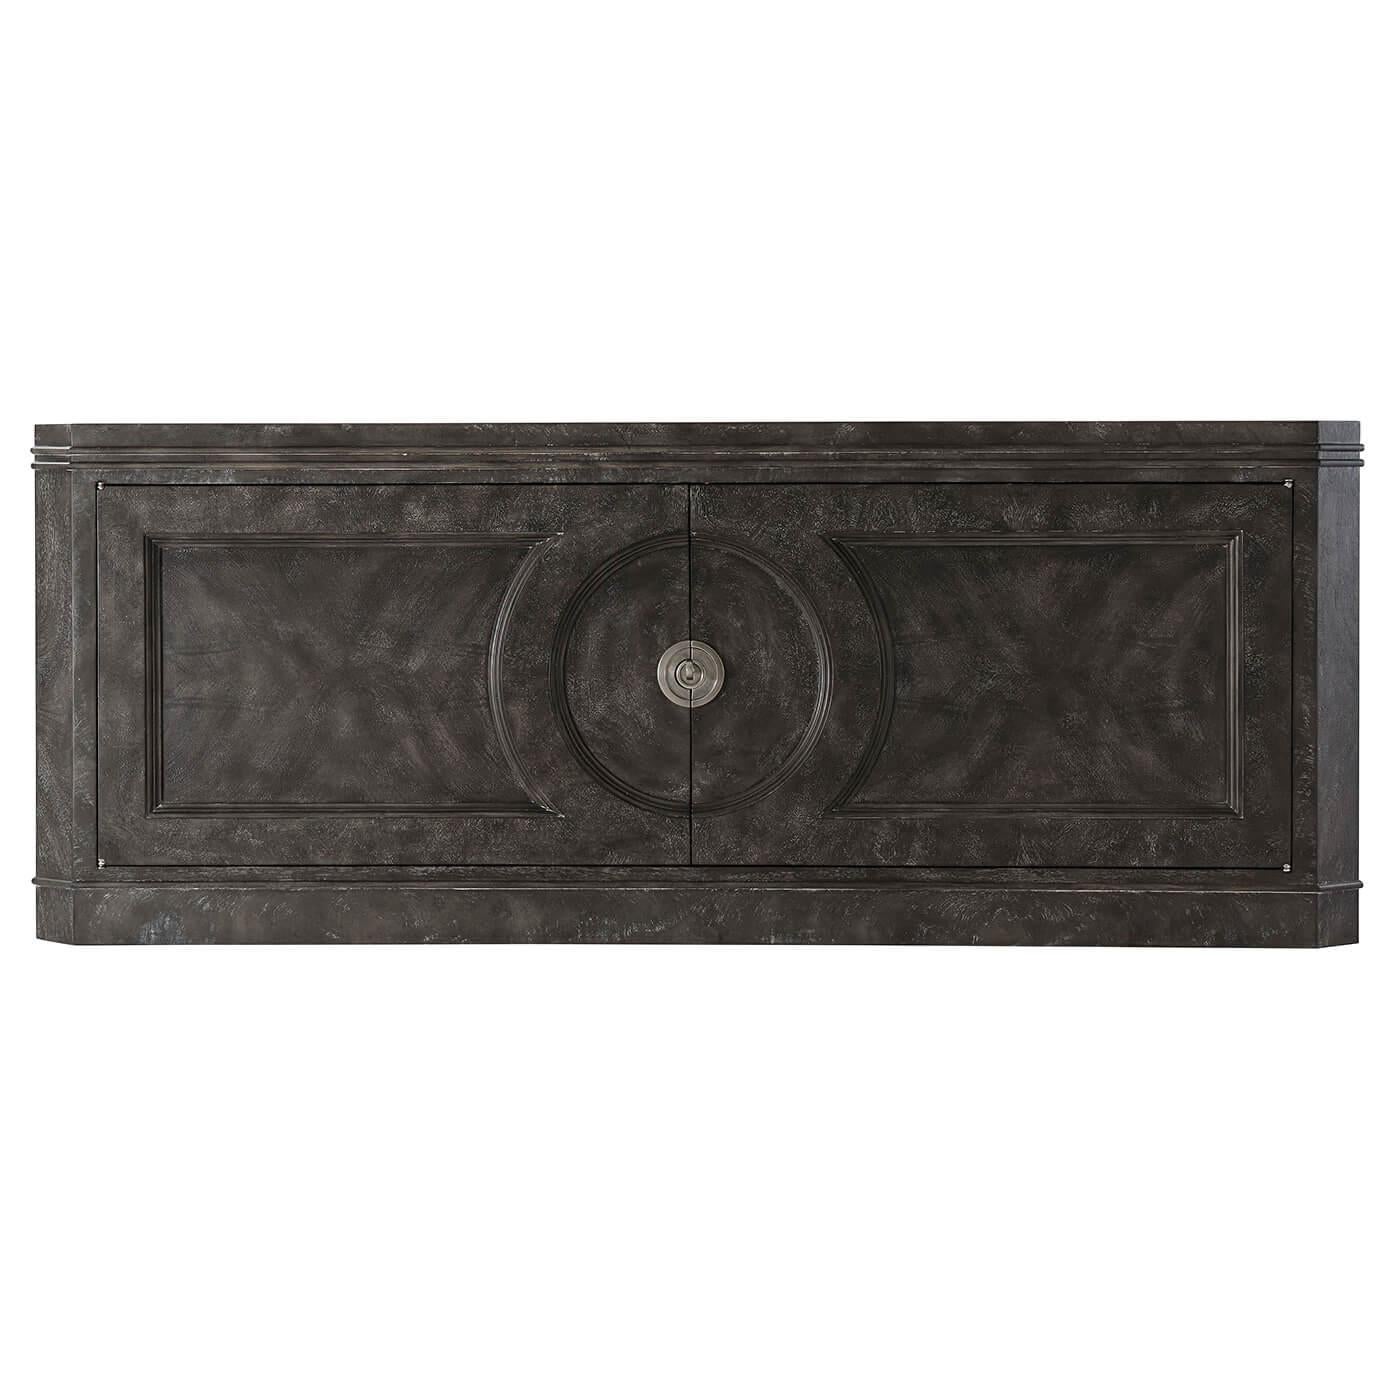 Modern dark ember low cabinet a modern swirl veneer two-door low cabinet. The modern cabinet with cerejeira swirl veneers in a dark ember finish with canted corners having beaded molding details, two relief paneled doors with circular center